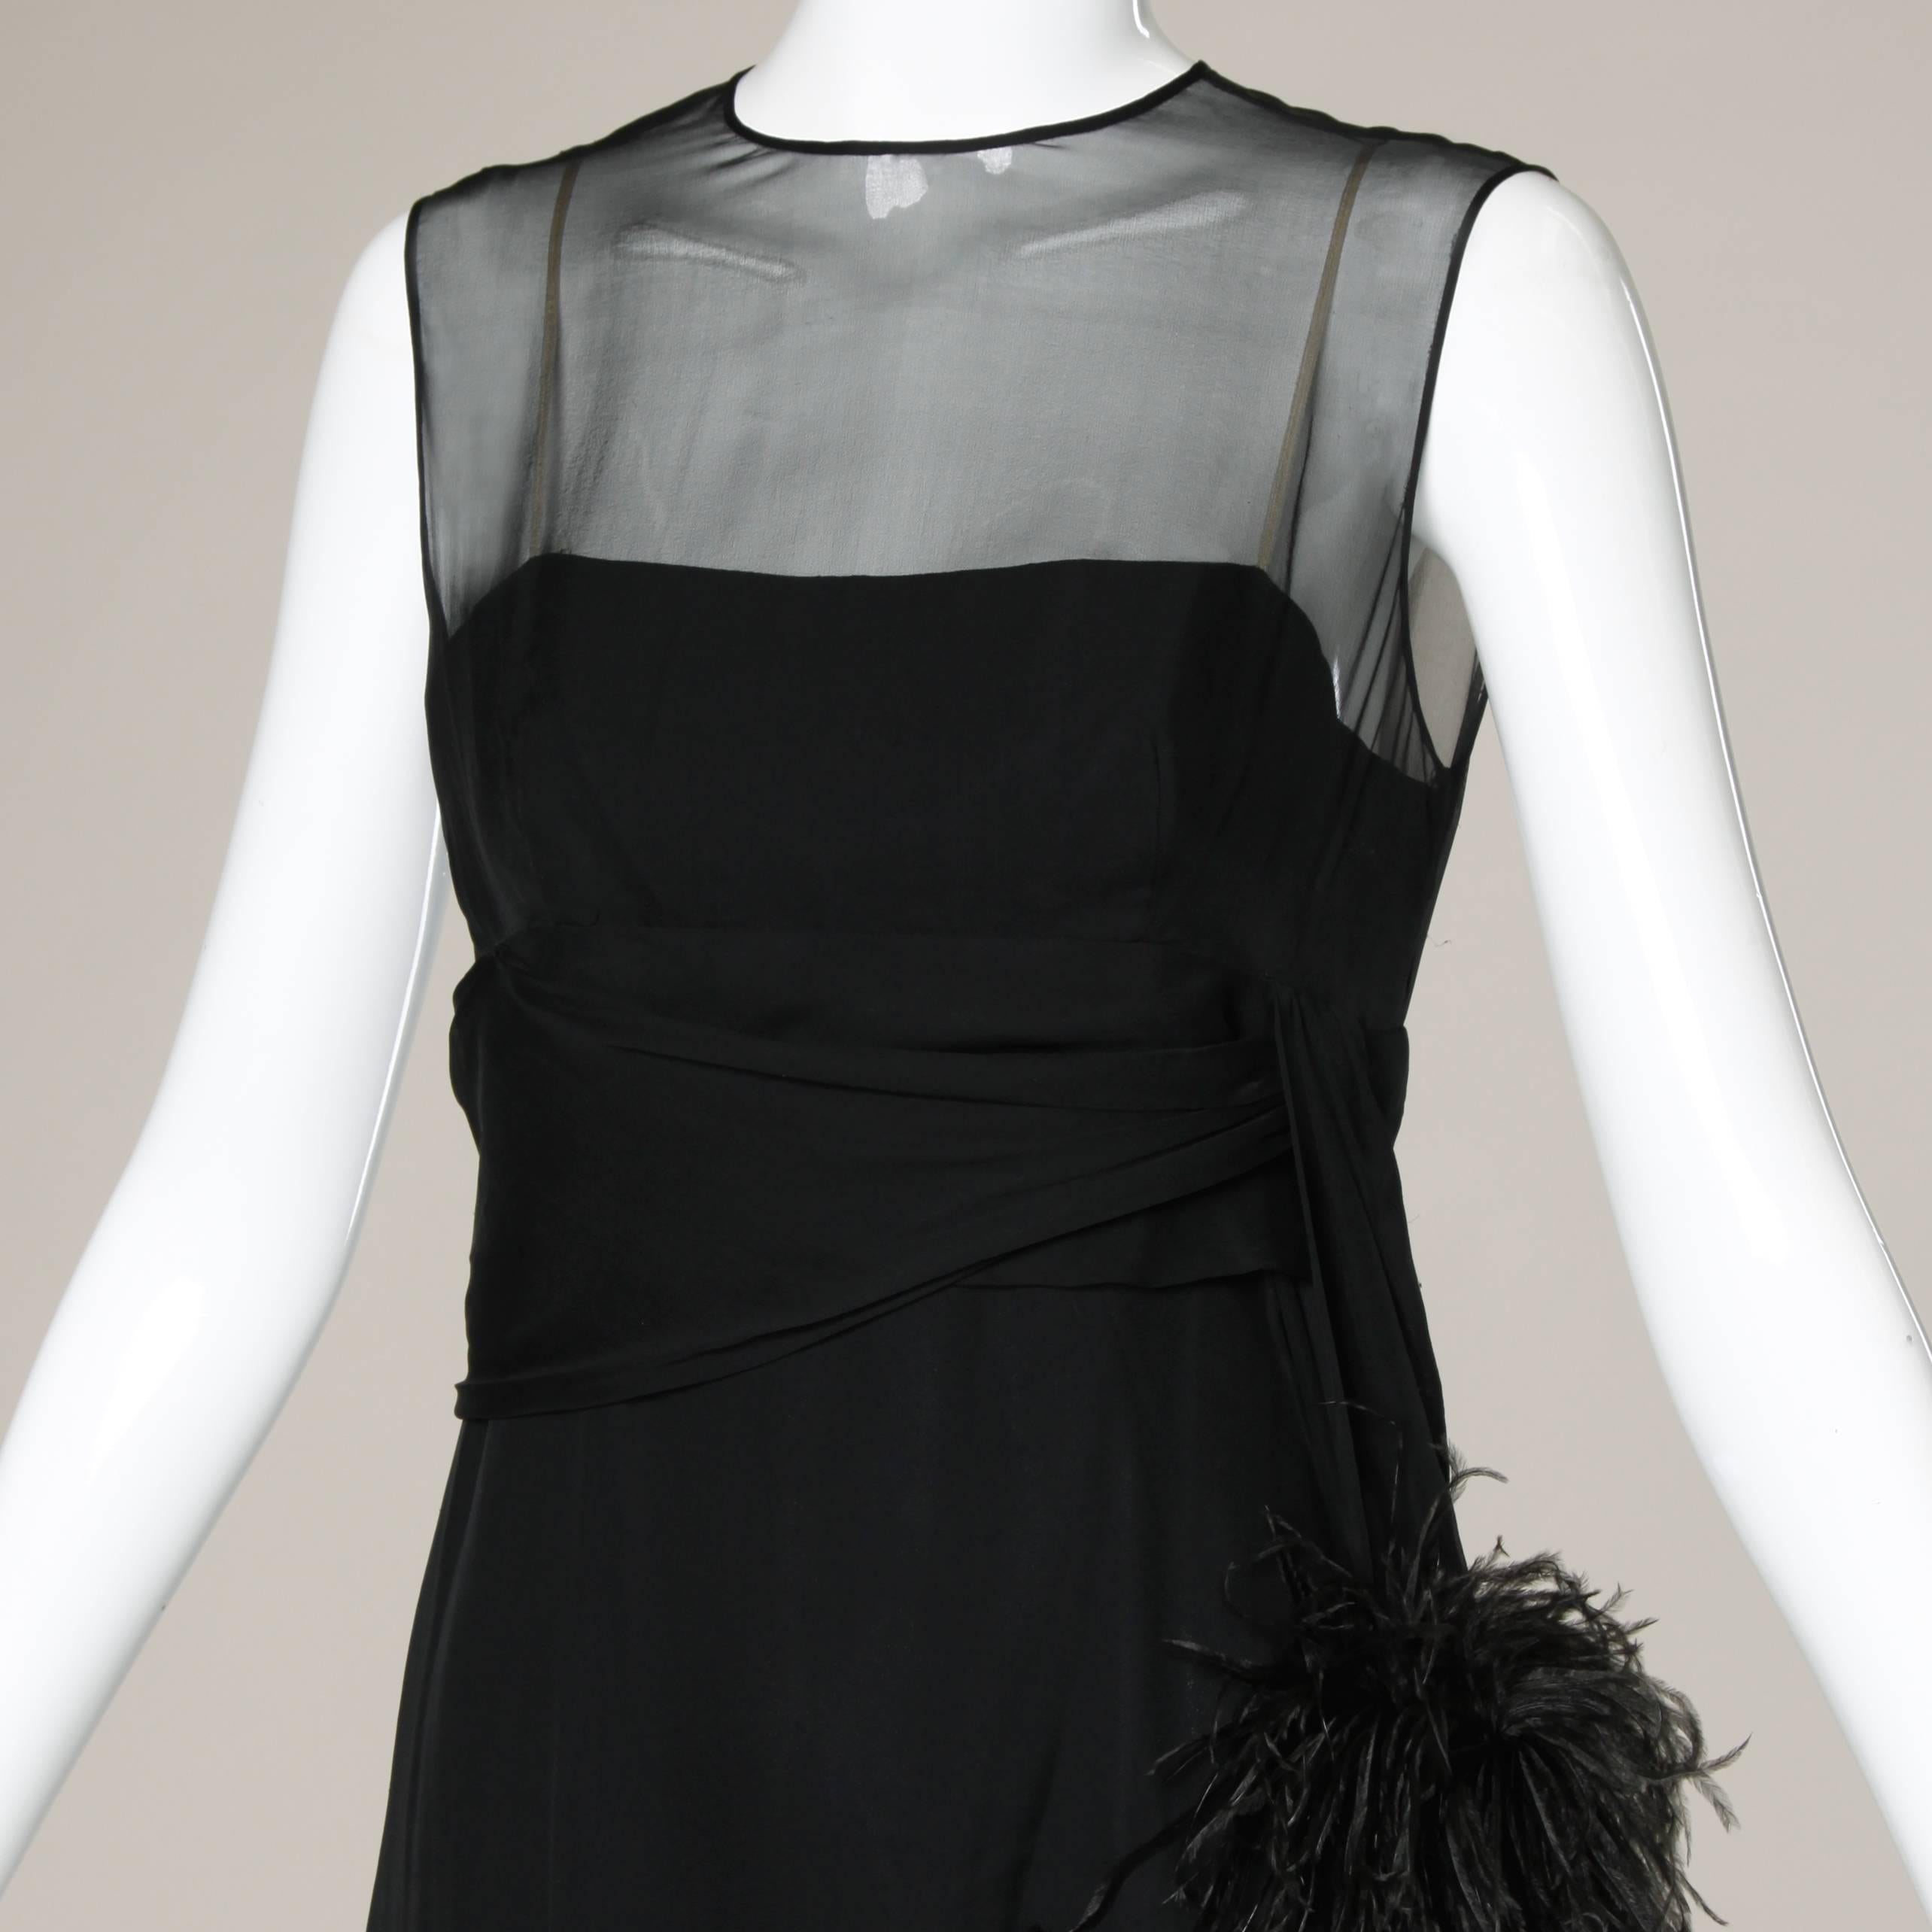 Phenomenal delicate silk chiffon dress with ostrich feather trim by Pat Sandler. 

Details:

Partially Lined
Back Zip, Hook and Button Closure
Marked Size: Not Marked
Estimated Size: Small-Medium
Color: Black
Fabric: Silk/ Ostrich Feathers
Label: